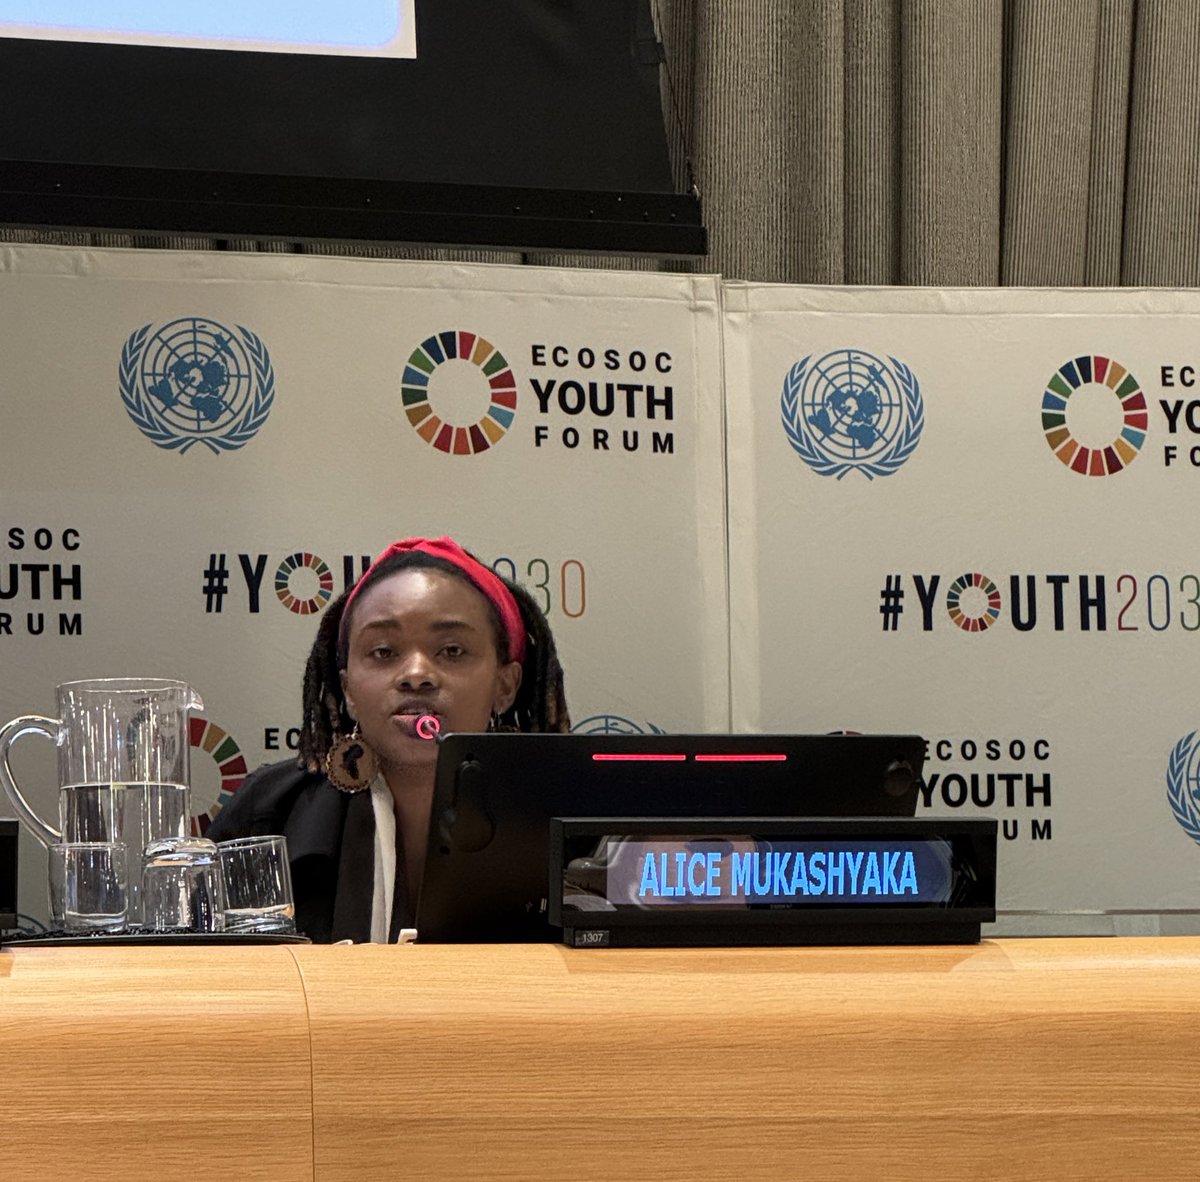 🤩 @WomenDeliver Young Leader Alum @alicem2016 spoke at the ECOSOC #Youth2030 Forum Africa session today!